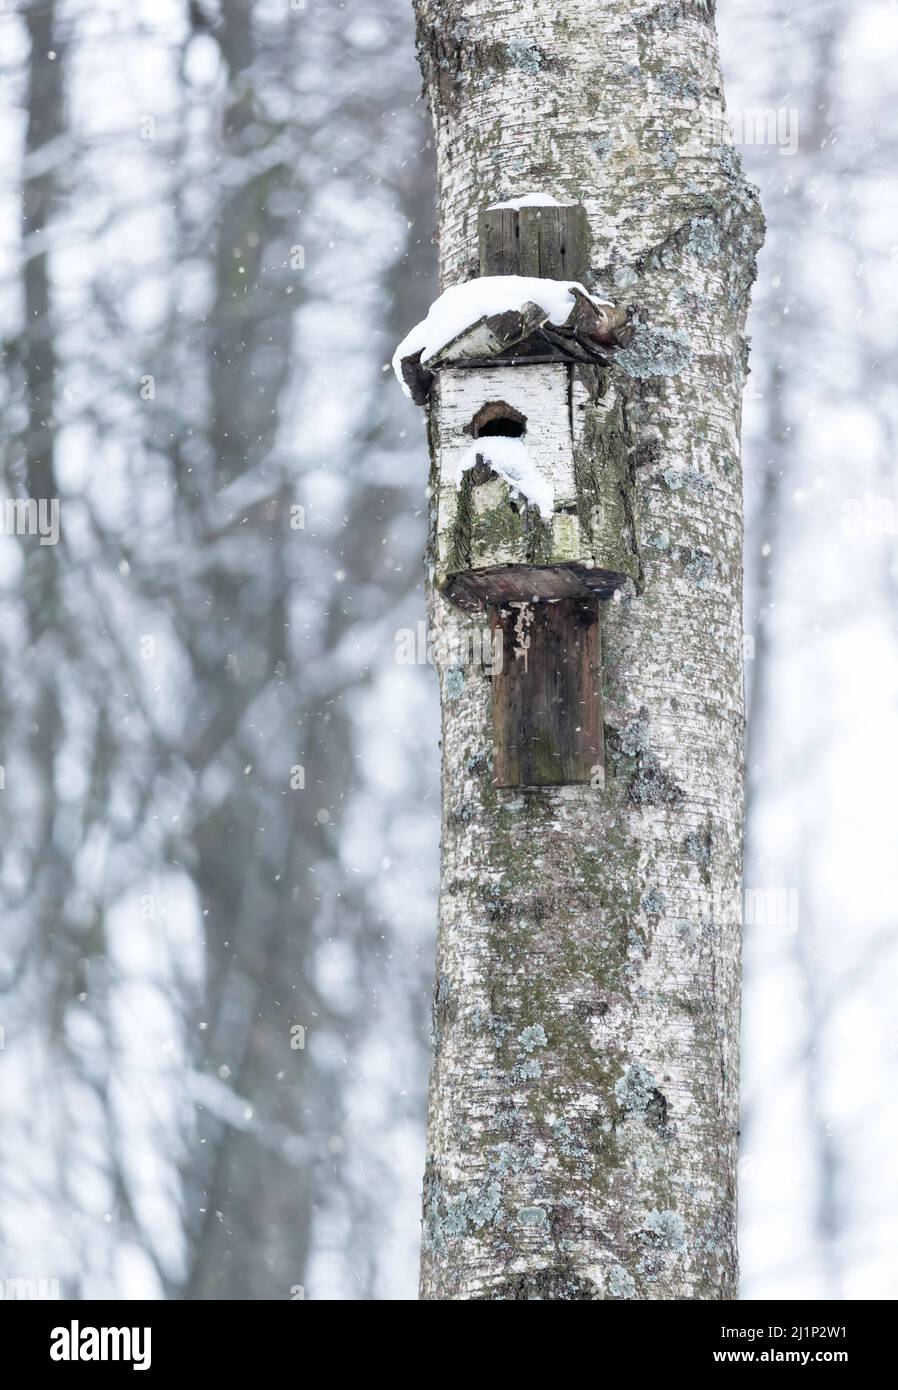 Close-up of a wooden bird nesting box fixed to a tree. Stock Photo